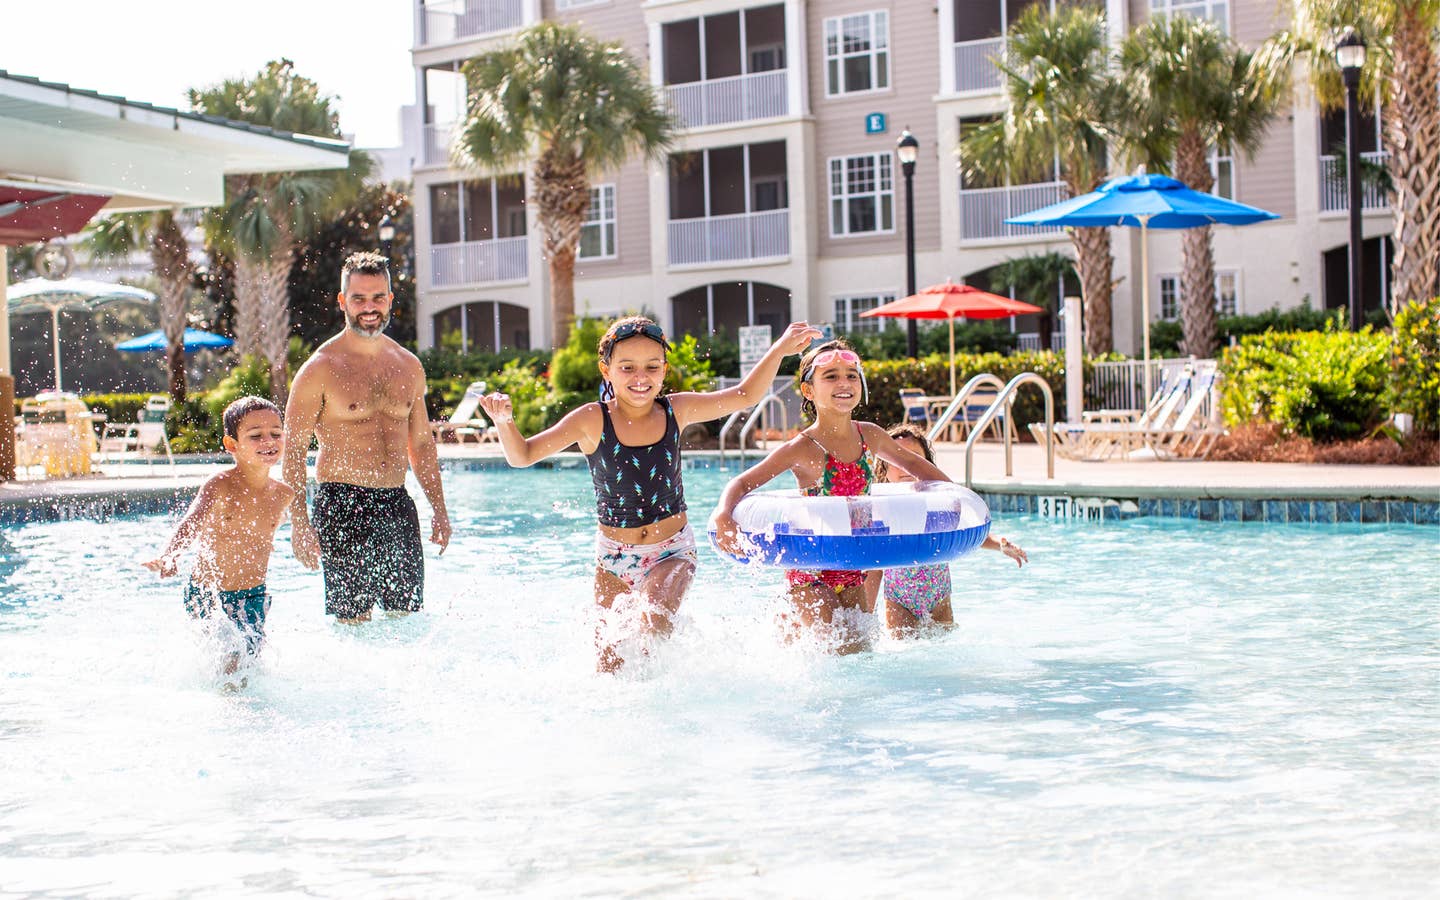 Family of four playing in pool at South Beach Resort in Myrtle Beach, South Carolina.